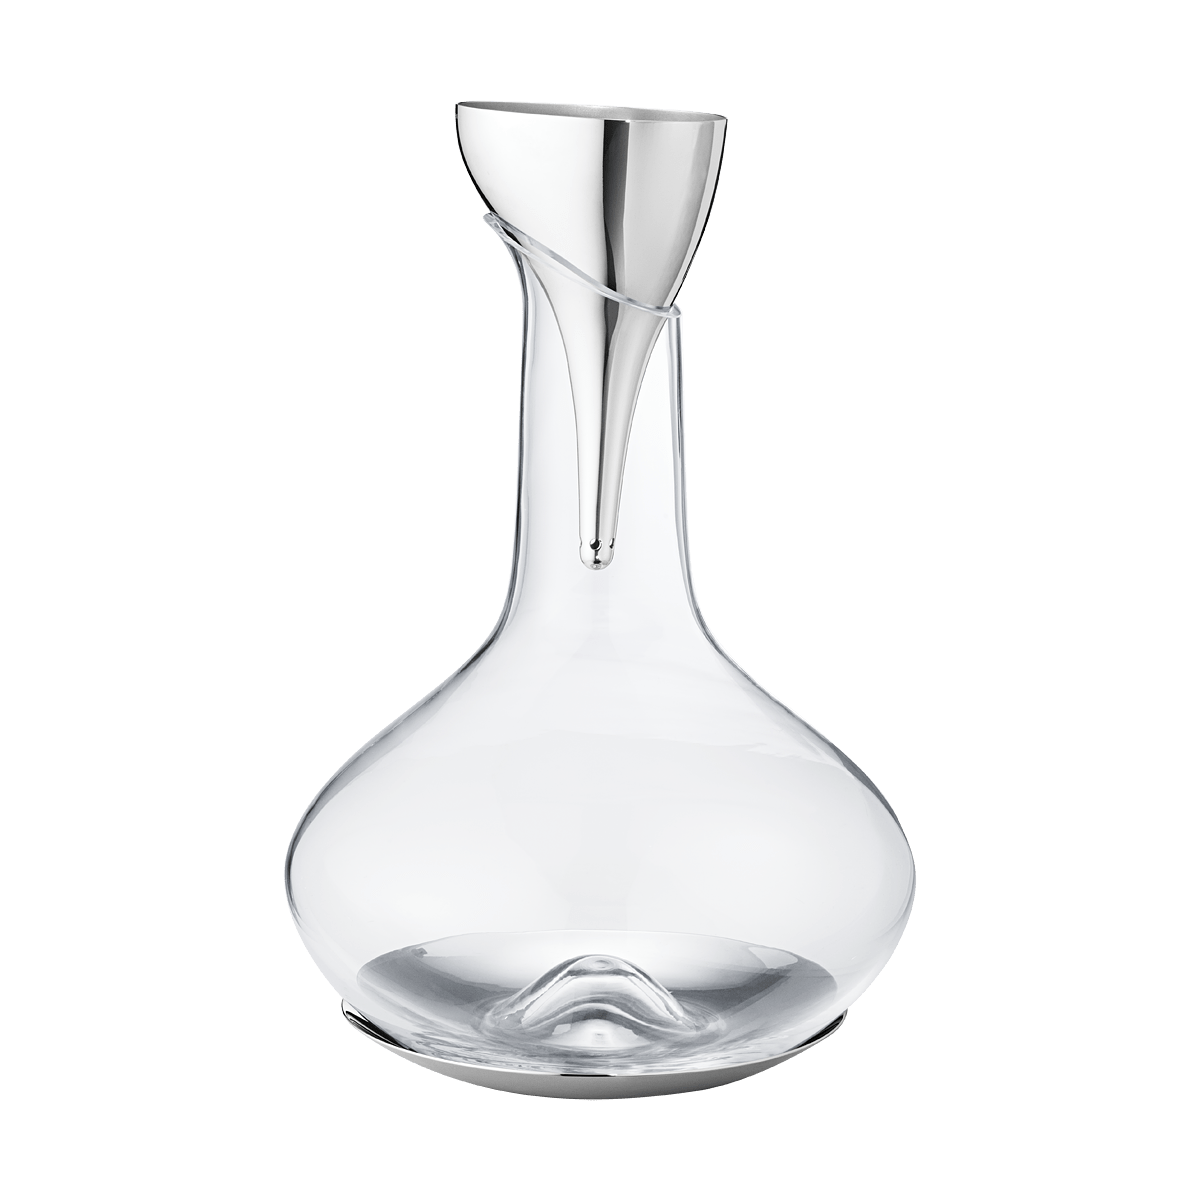 https://res.cloudinary.com/georgjensen/image/upload/f_auto,dpr_2/w_auto,c_scale/products/images/hi-res/10019304_SKY_WINE_DECANTER_AERATING_FUNNEL_W_FILTER_STAINLESS_STEEL_02?_i=AG